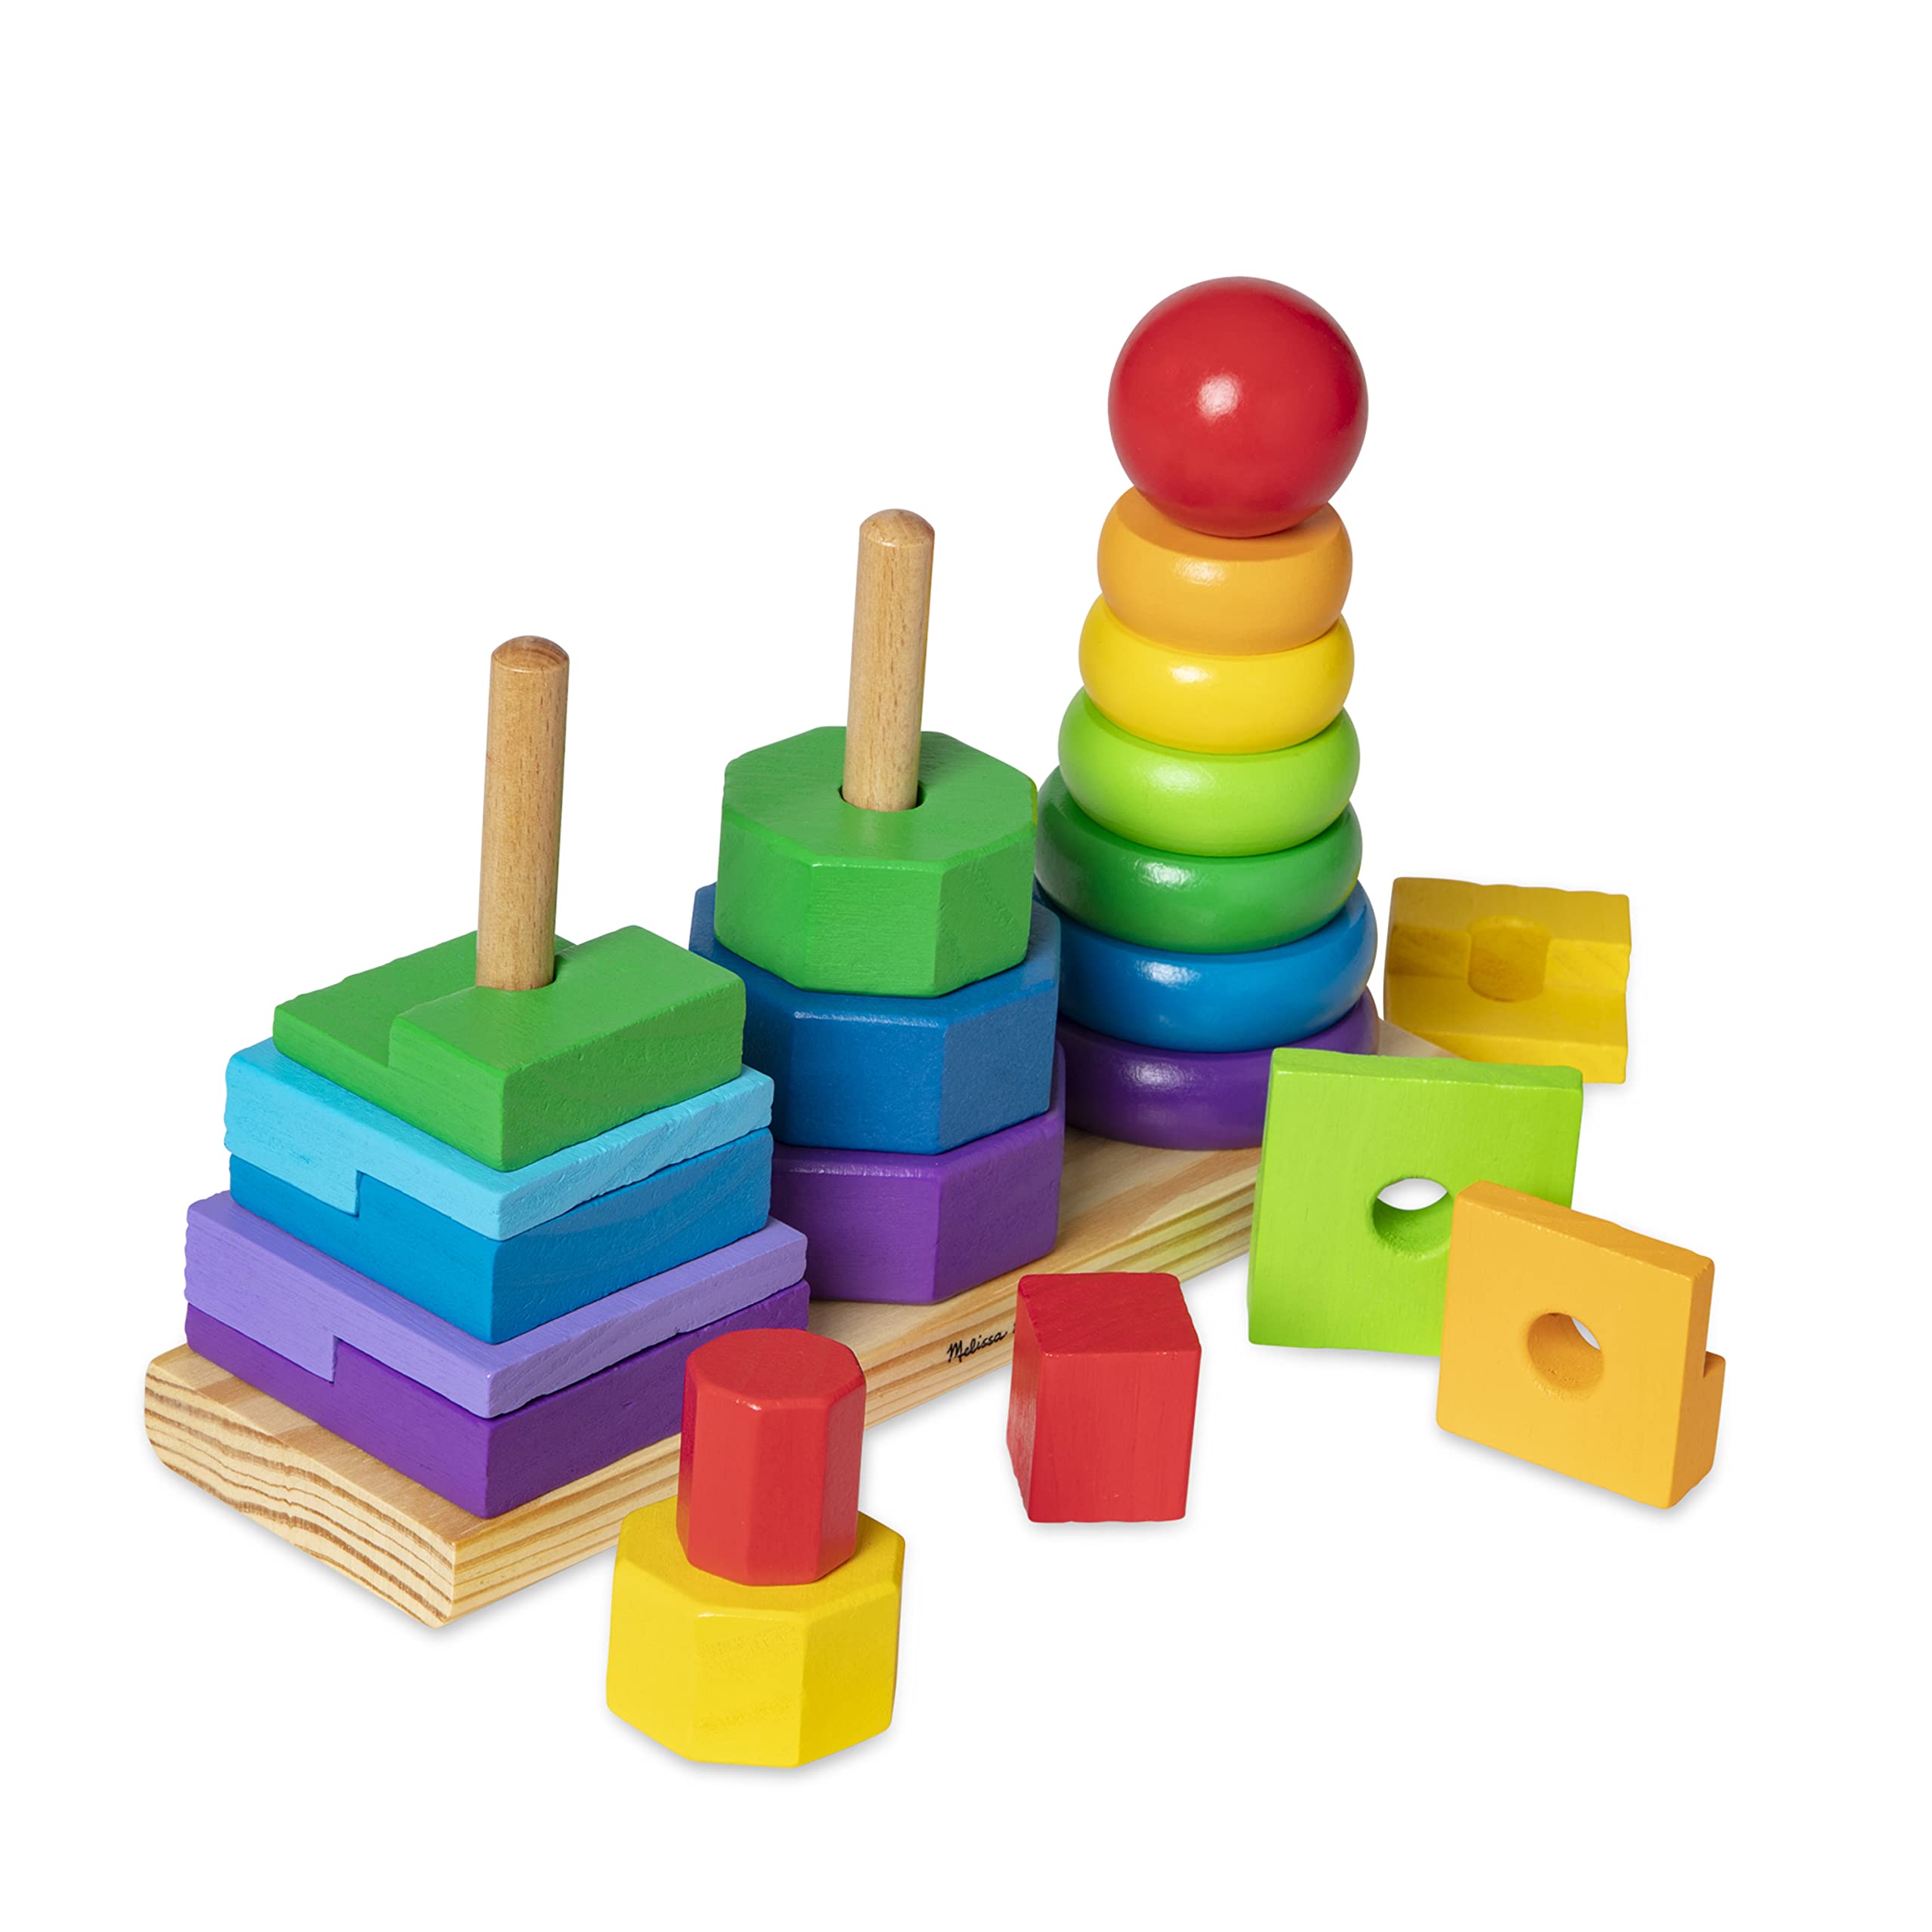 Melissa & Doug Geometric Stacker - Wooden Educational Toy - Shape Sorter And Stacking Toy, Stacking Tower Toy For Babies, Toddlers And Kids Ages 2+